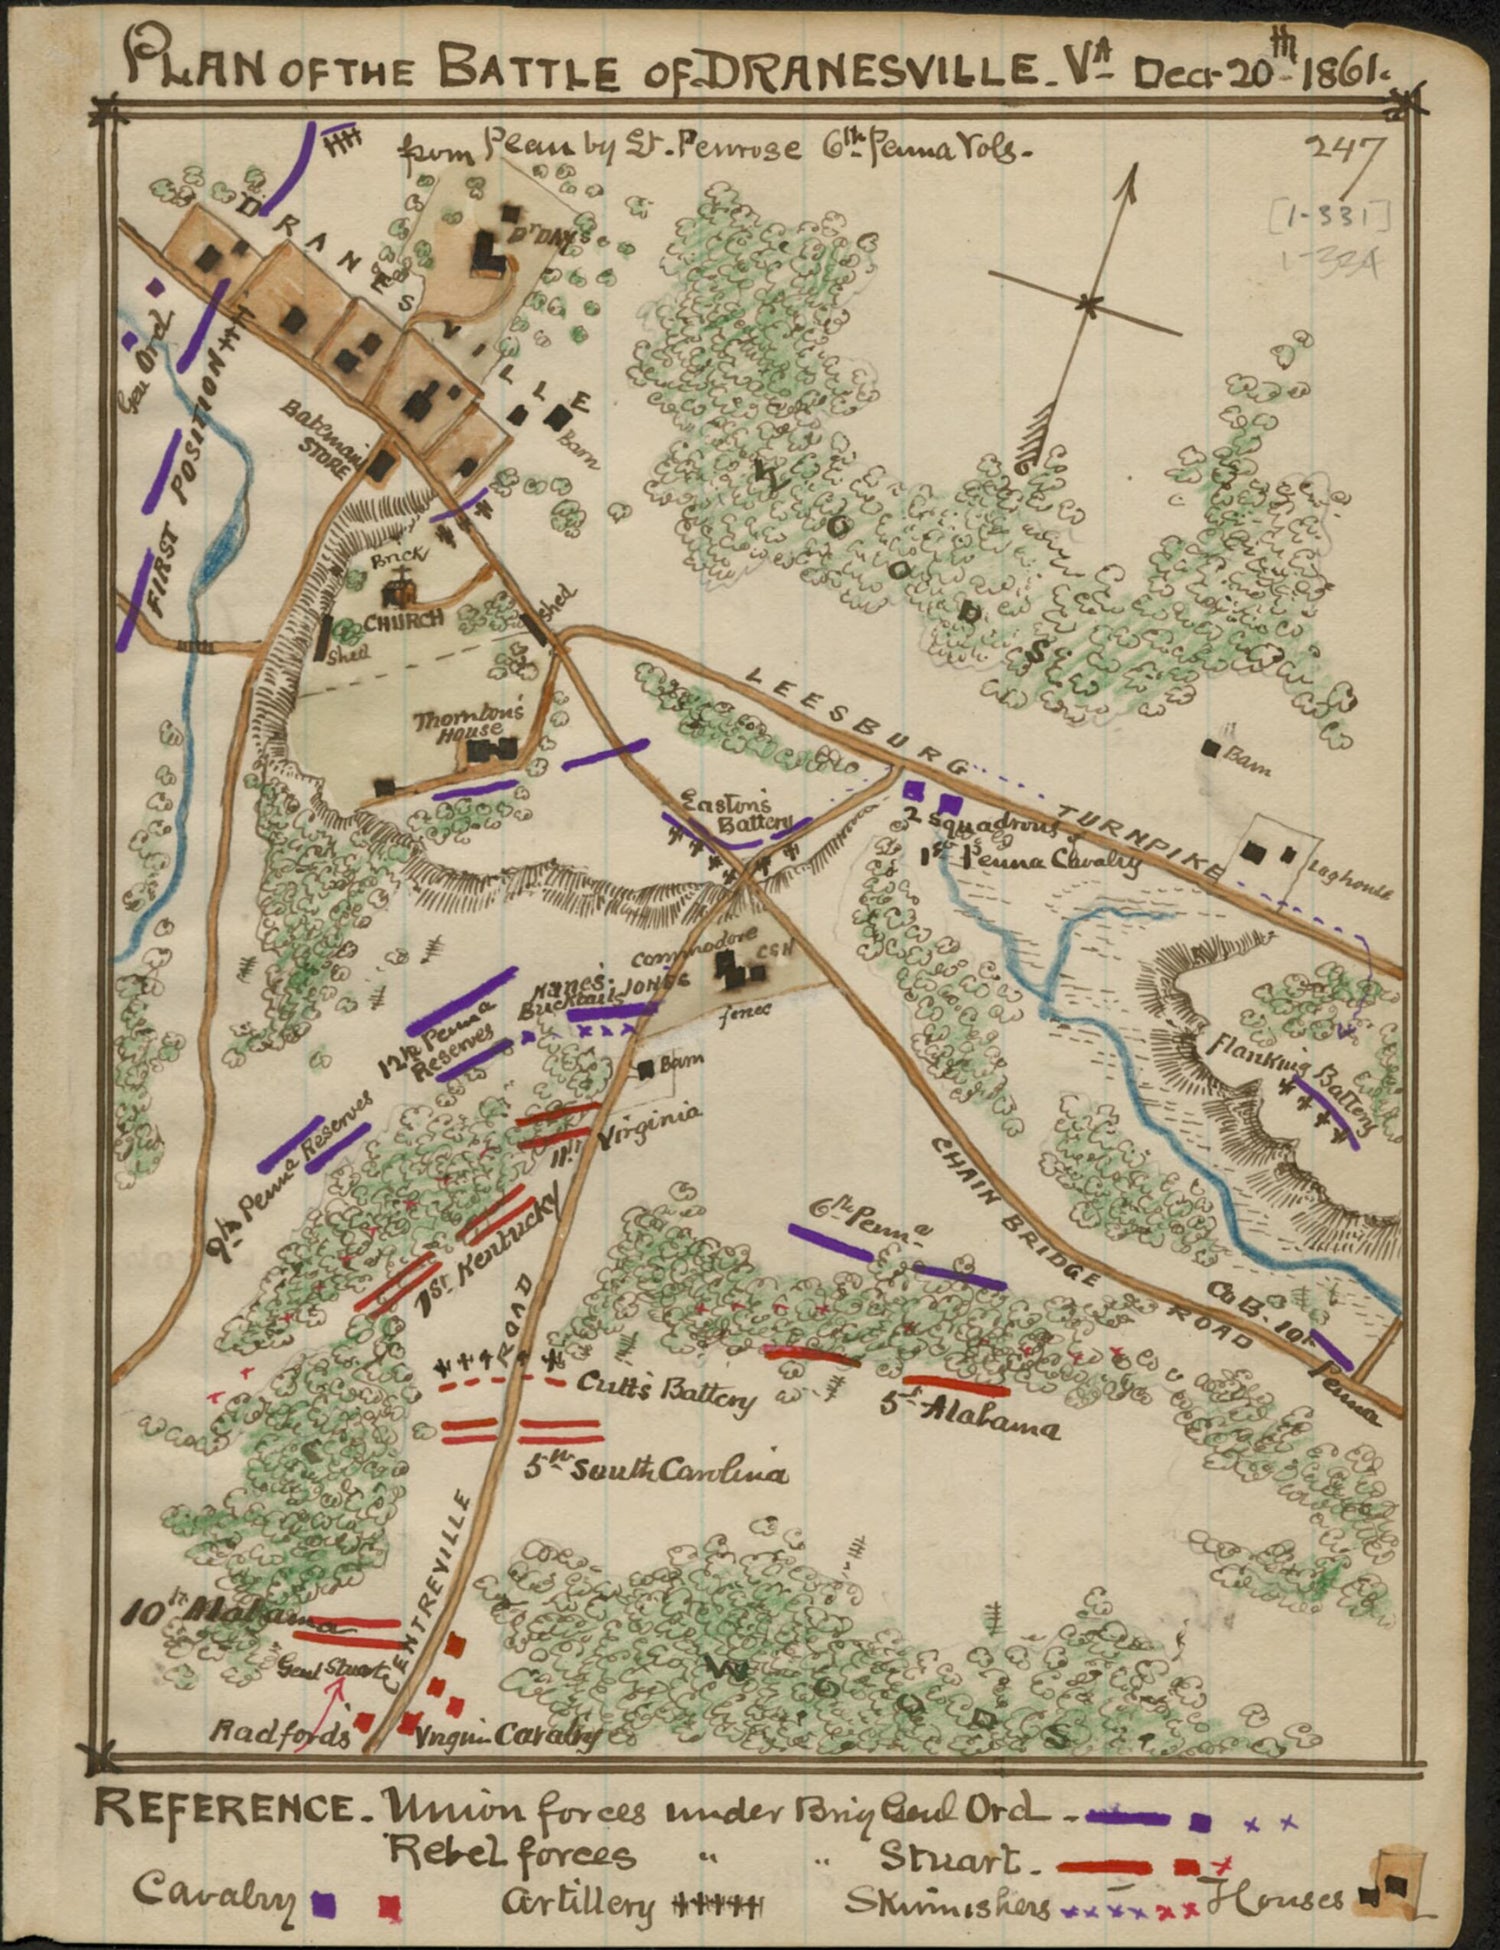 This old map of Plan of the Battle of Dranesville Va Decr 20th 1861 from 12-20 was created by Robert Knox Sneden in 12-20